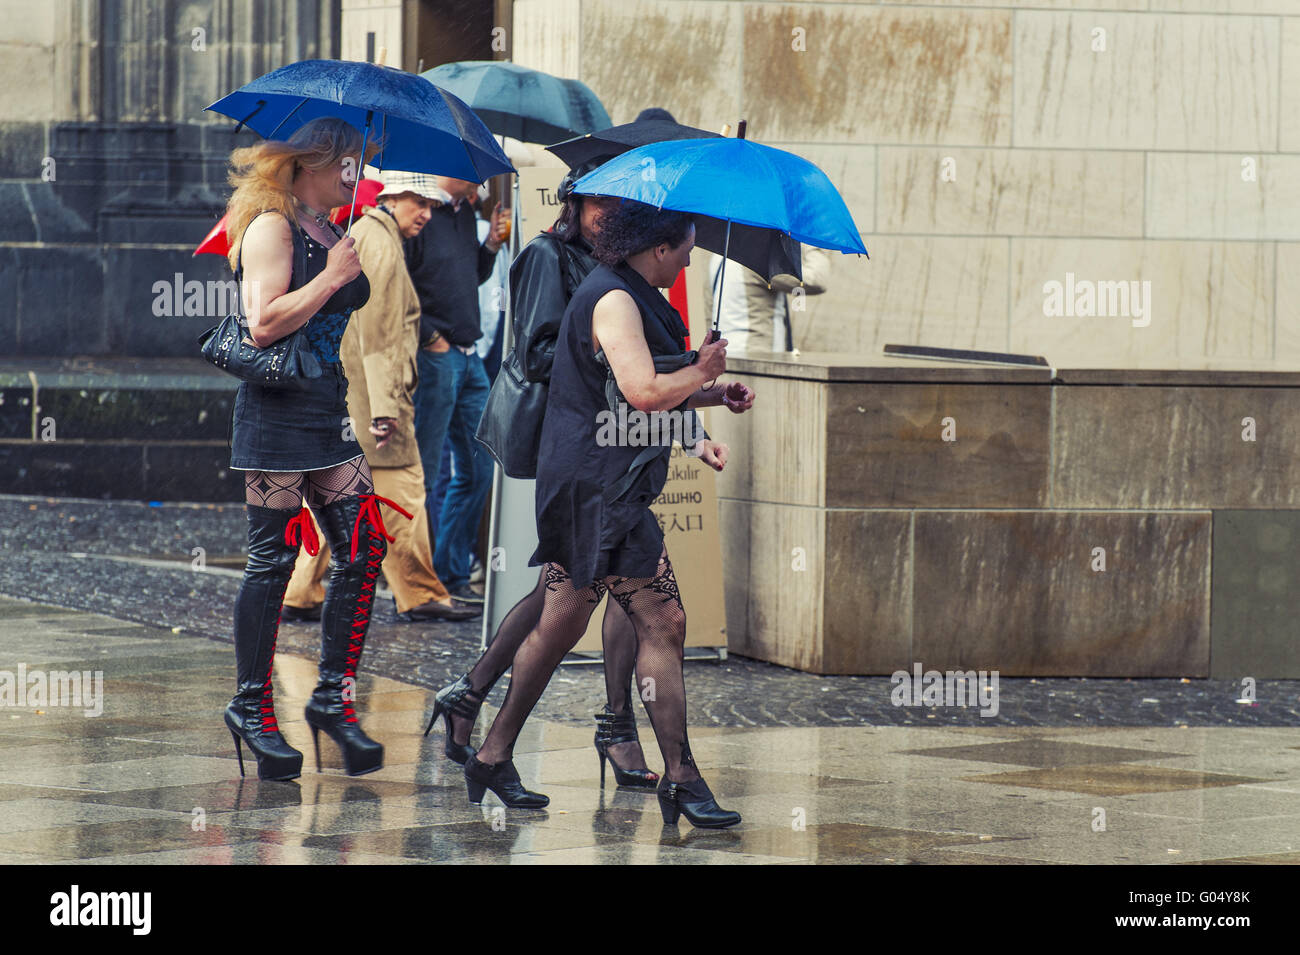 costumed men and women on their way to the CSD in Stock Photo